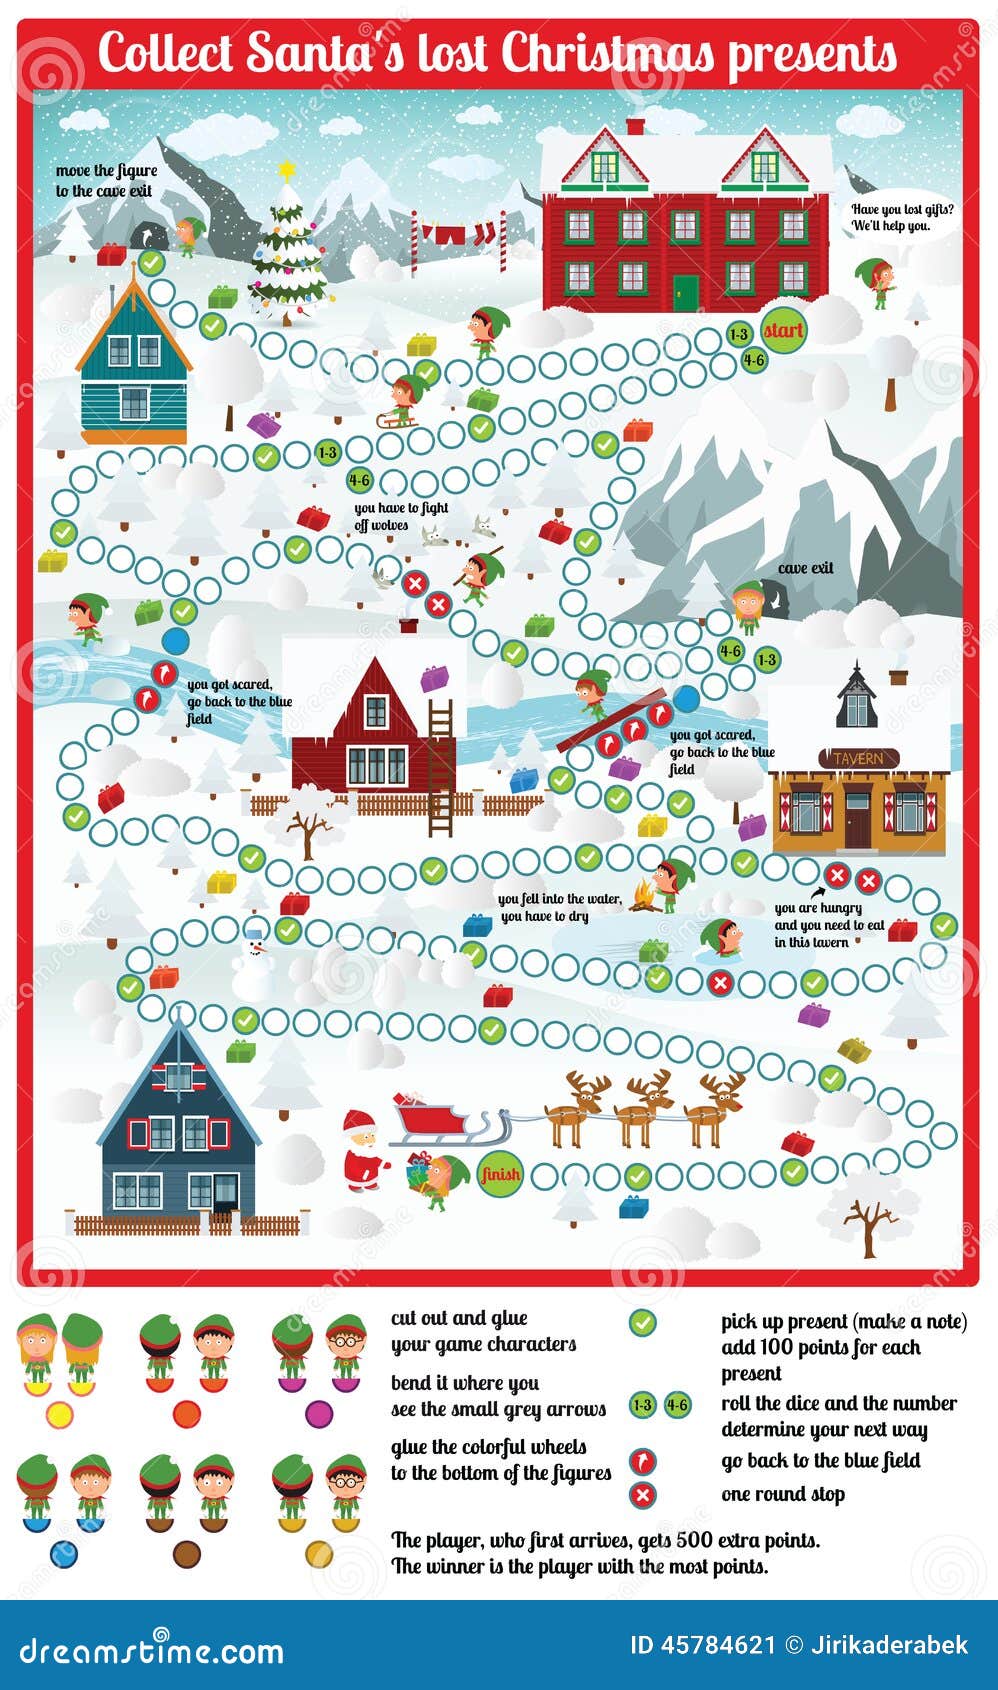 board game (collect santa's lost christmas presents)